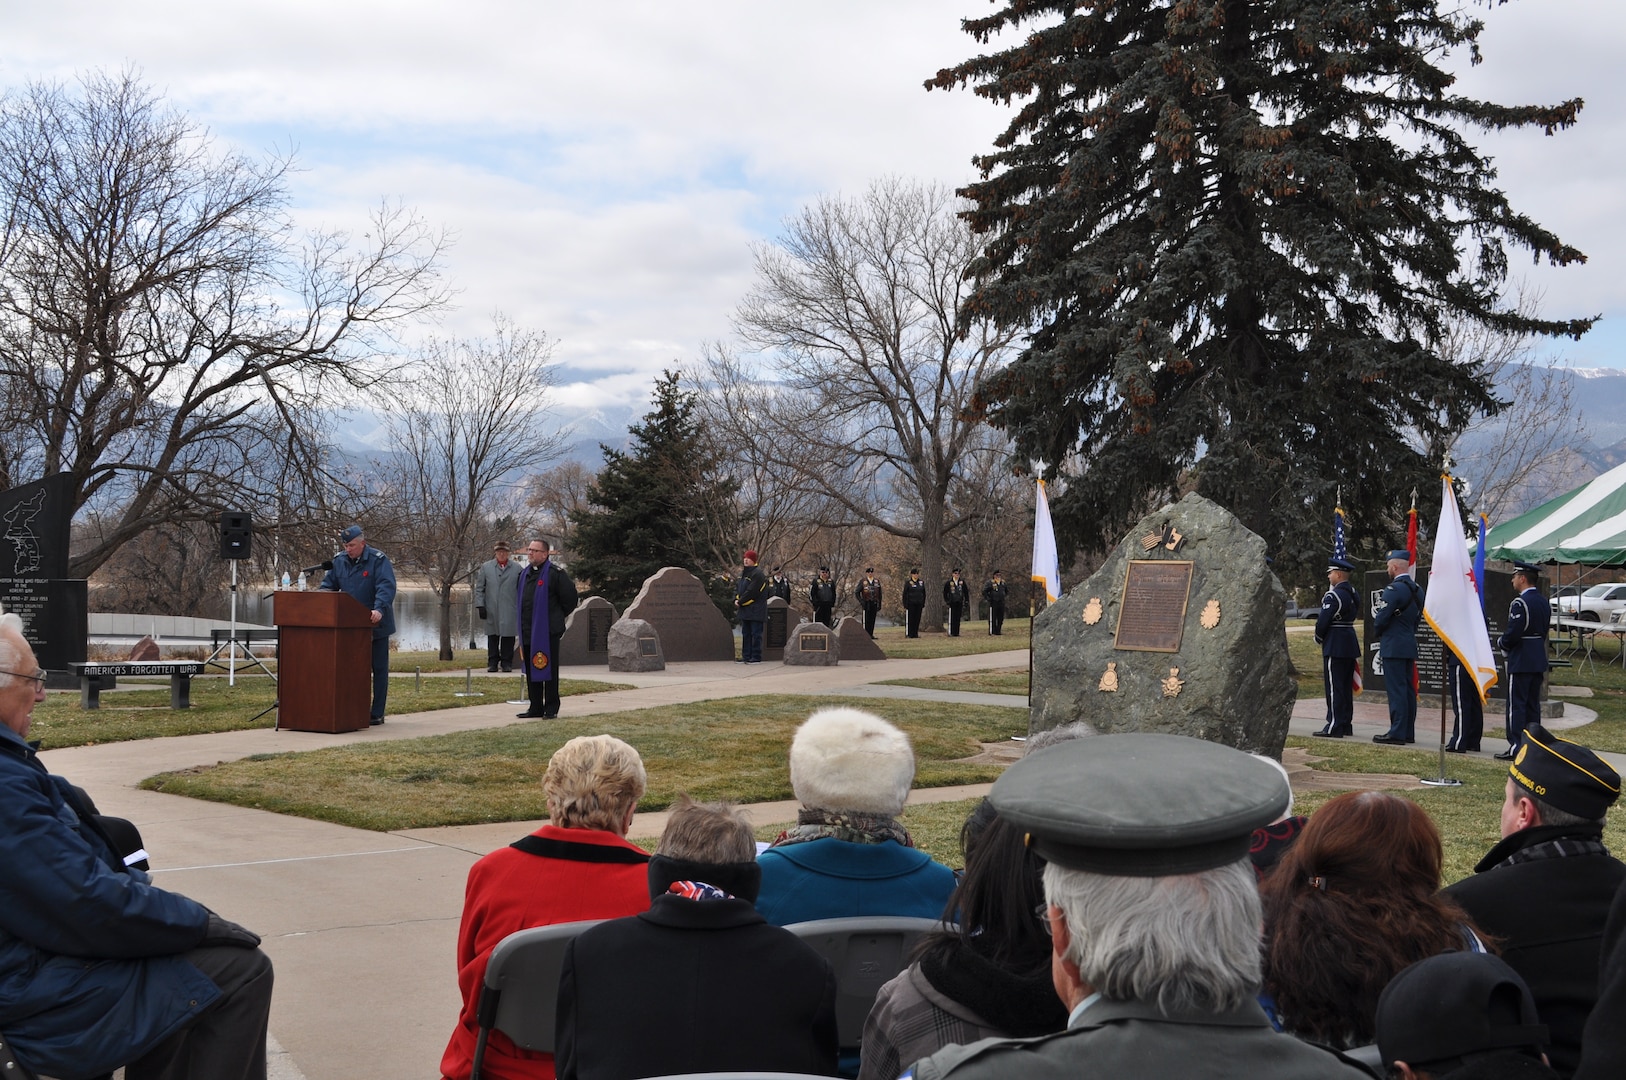 Gathered at a hybrid American and Canadian Remembrance Day/Veteran’s Day ceremony in Colorado Springs on November 11, 2019, the Canadian Element of North American Aerospace Defense Command (NORAD) had a unique opportunity to reflect upon the longstanding military relationship between Canada and the United States over the last 100 years.